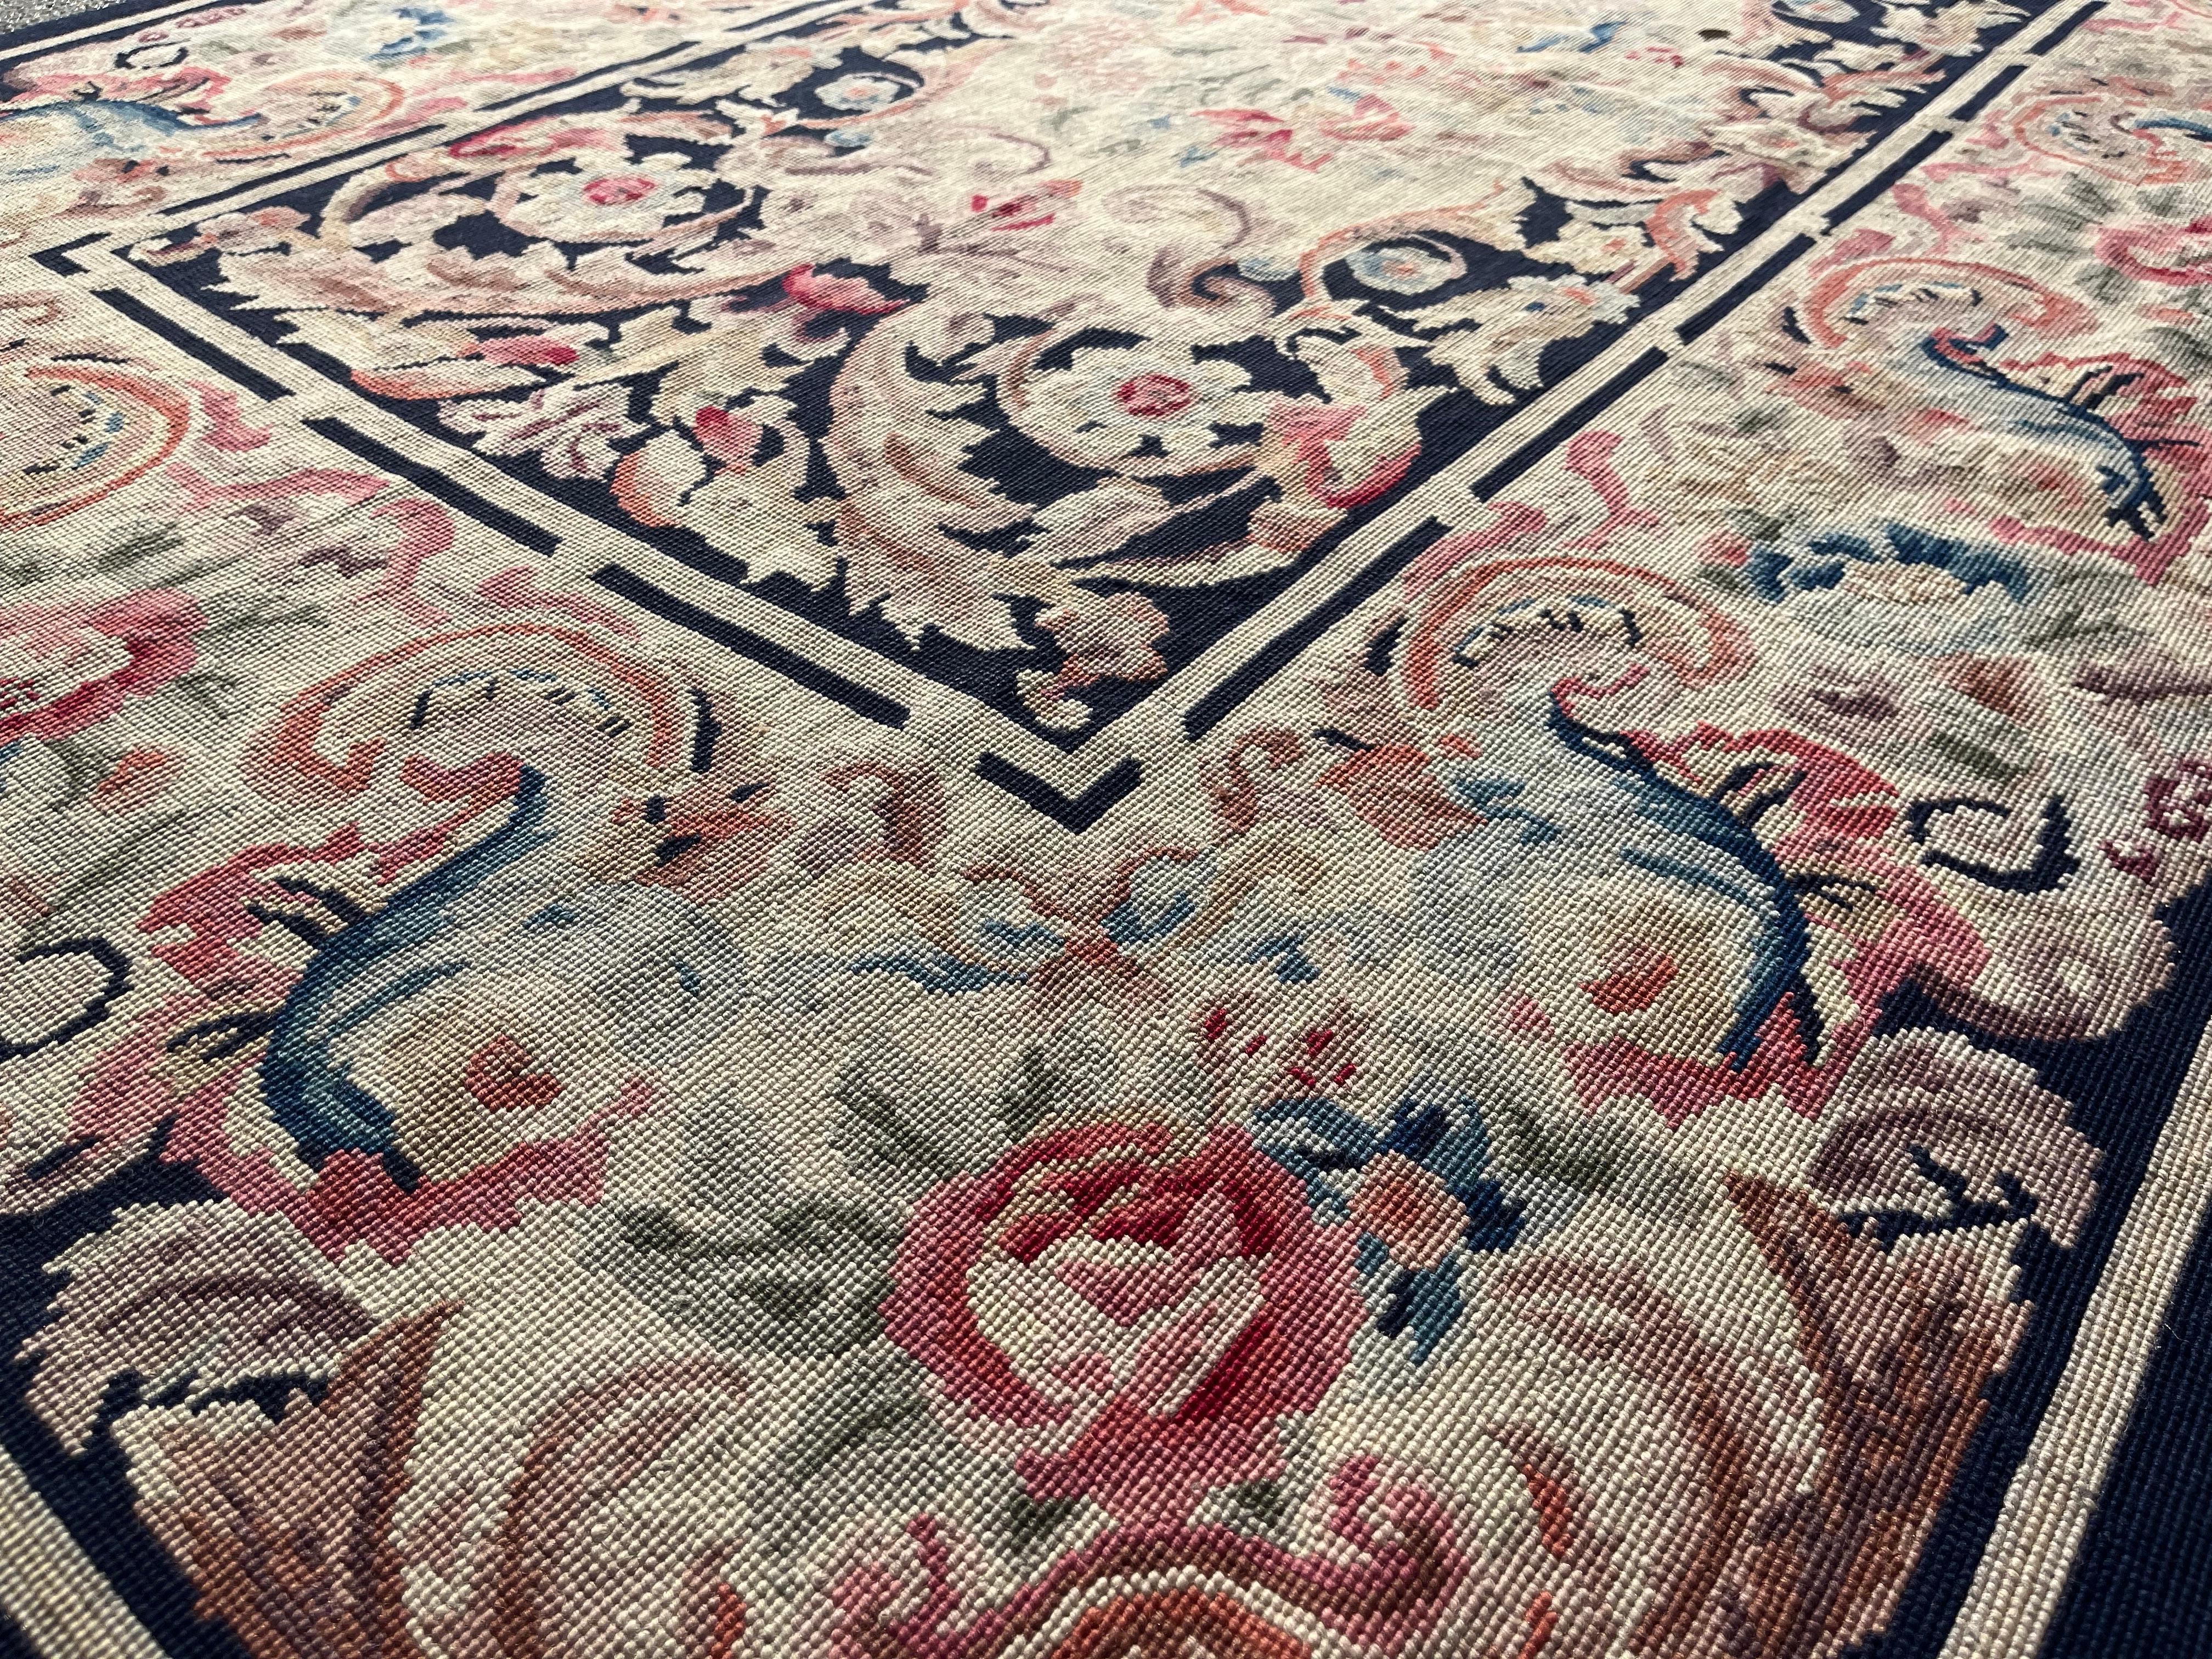 Carpet with knotted stitches in the style of Aubusson For Sale 2